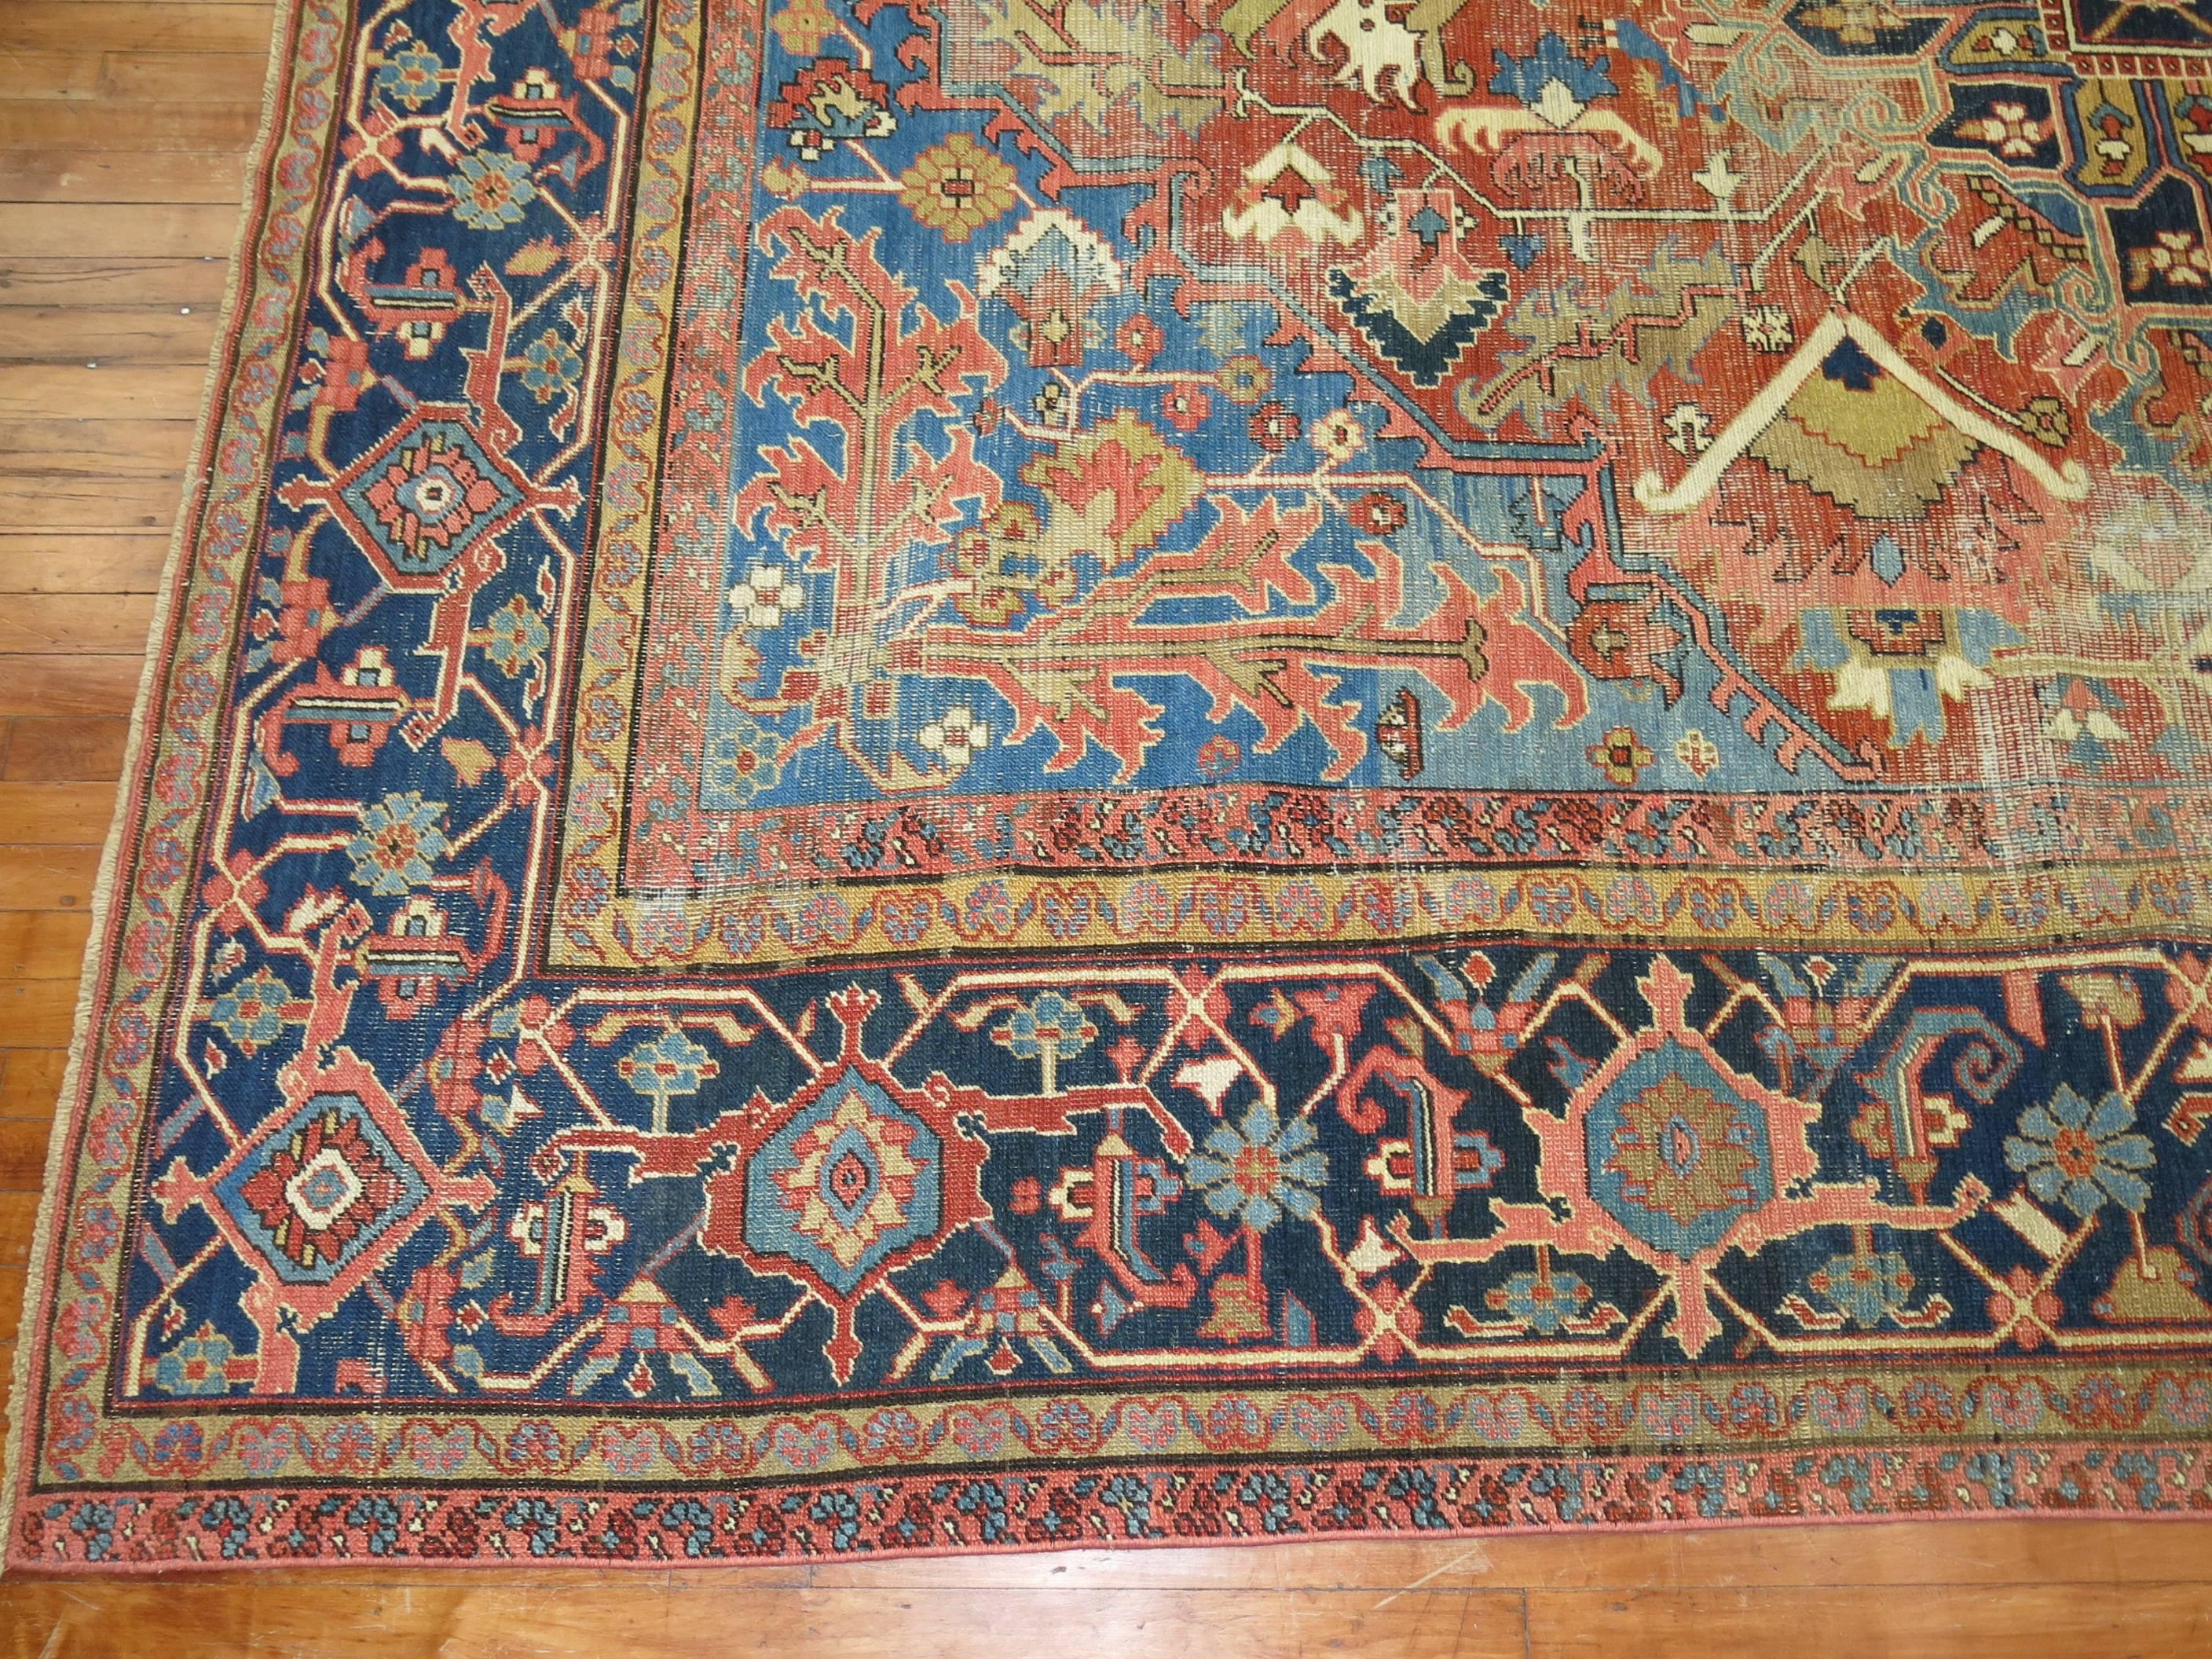 Colorful Room Size Antique Persian Heriz Rug.
We love the natural wear on this rug because it shows a real taste of the life that it's already lived, Also shows it has a had a history and character which truly makes it one of a kind gem.

Heriz